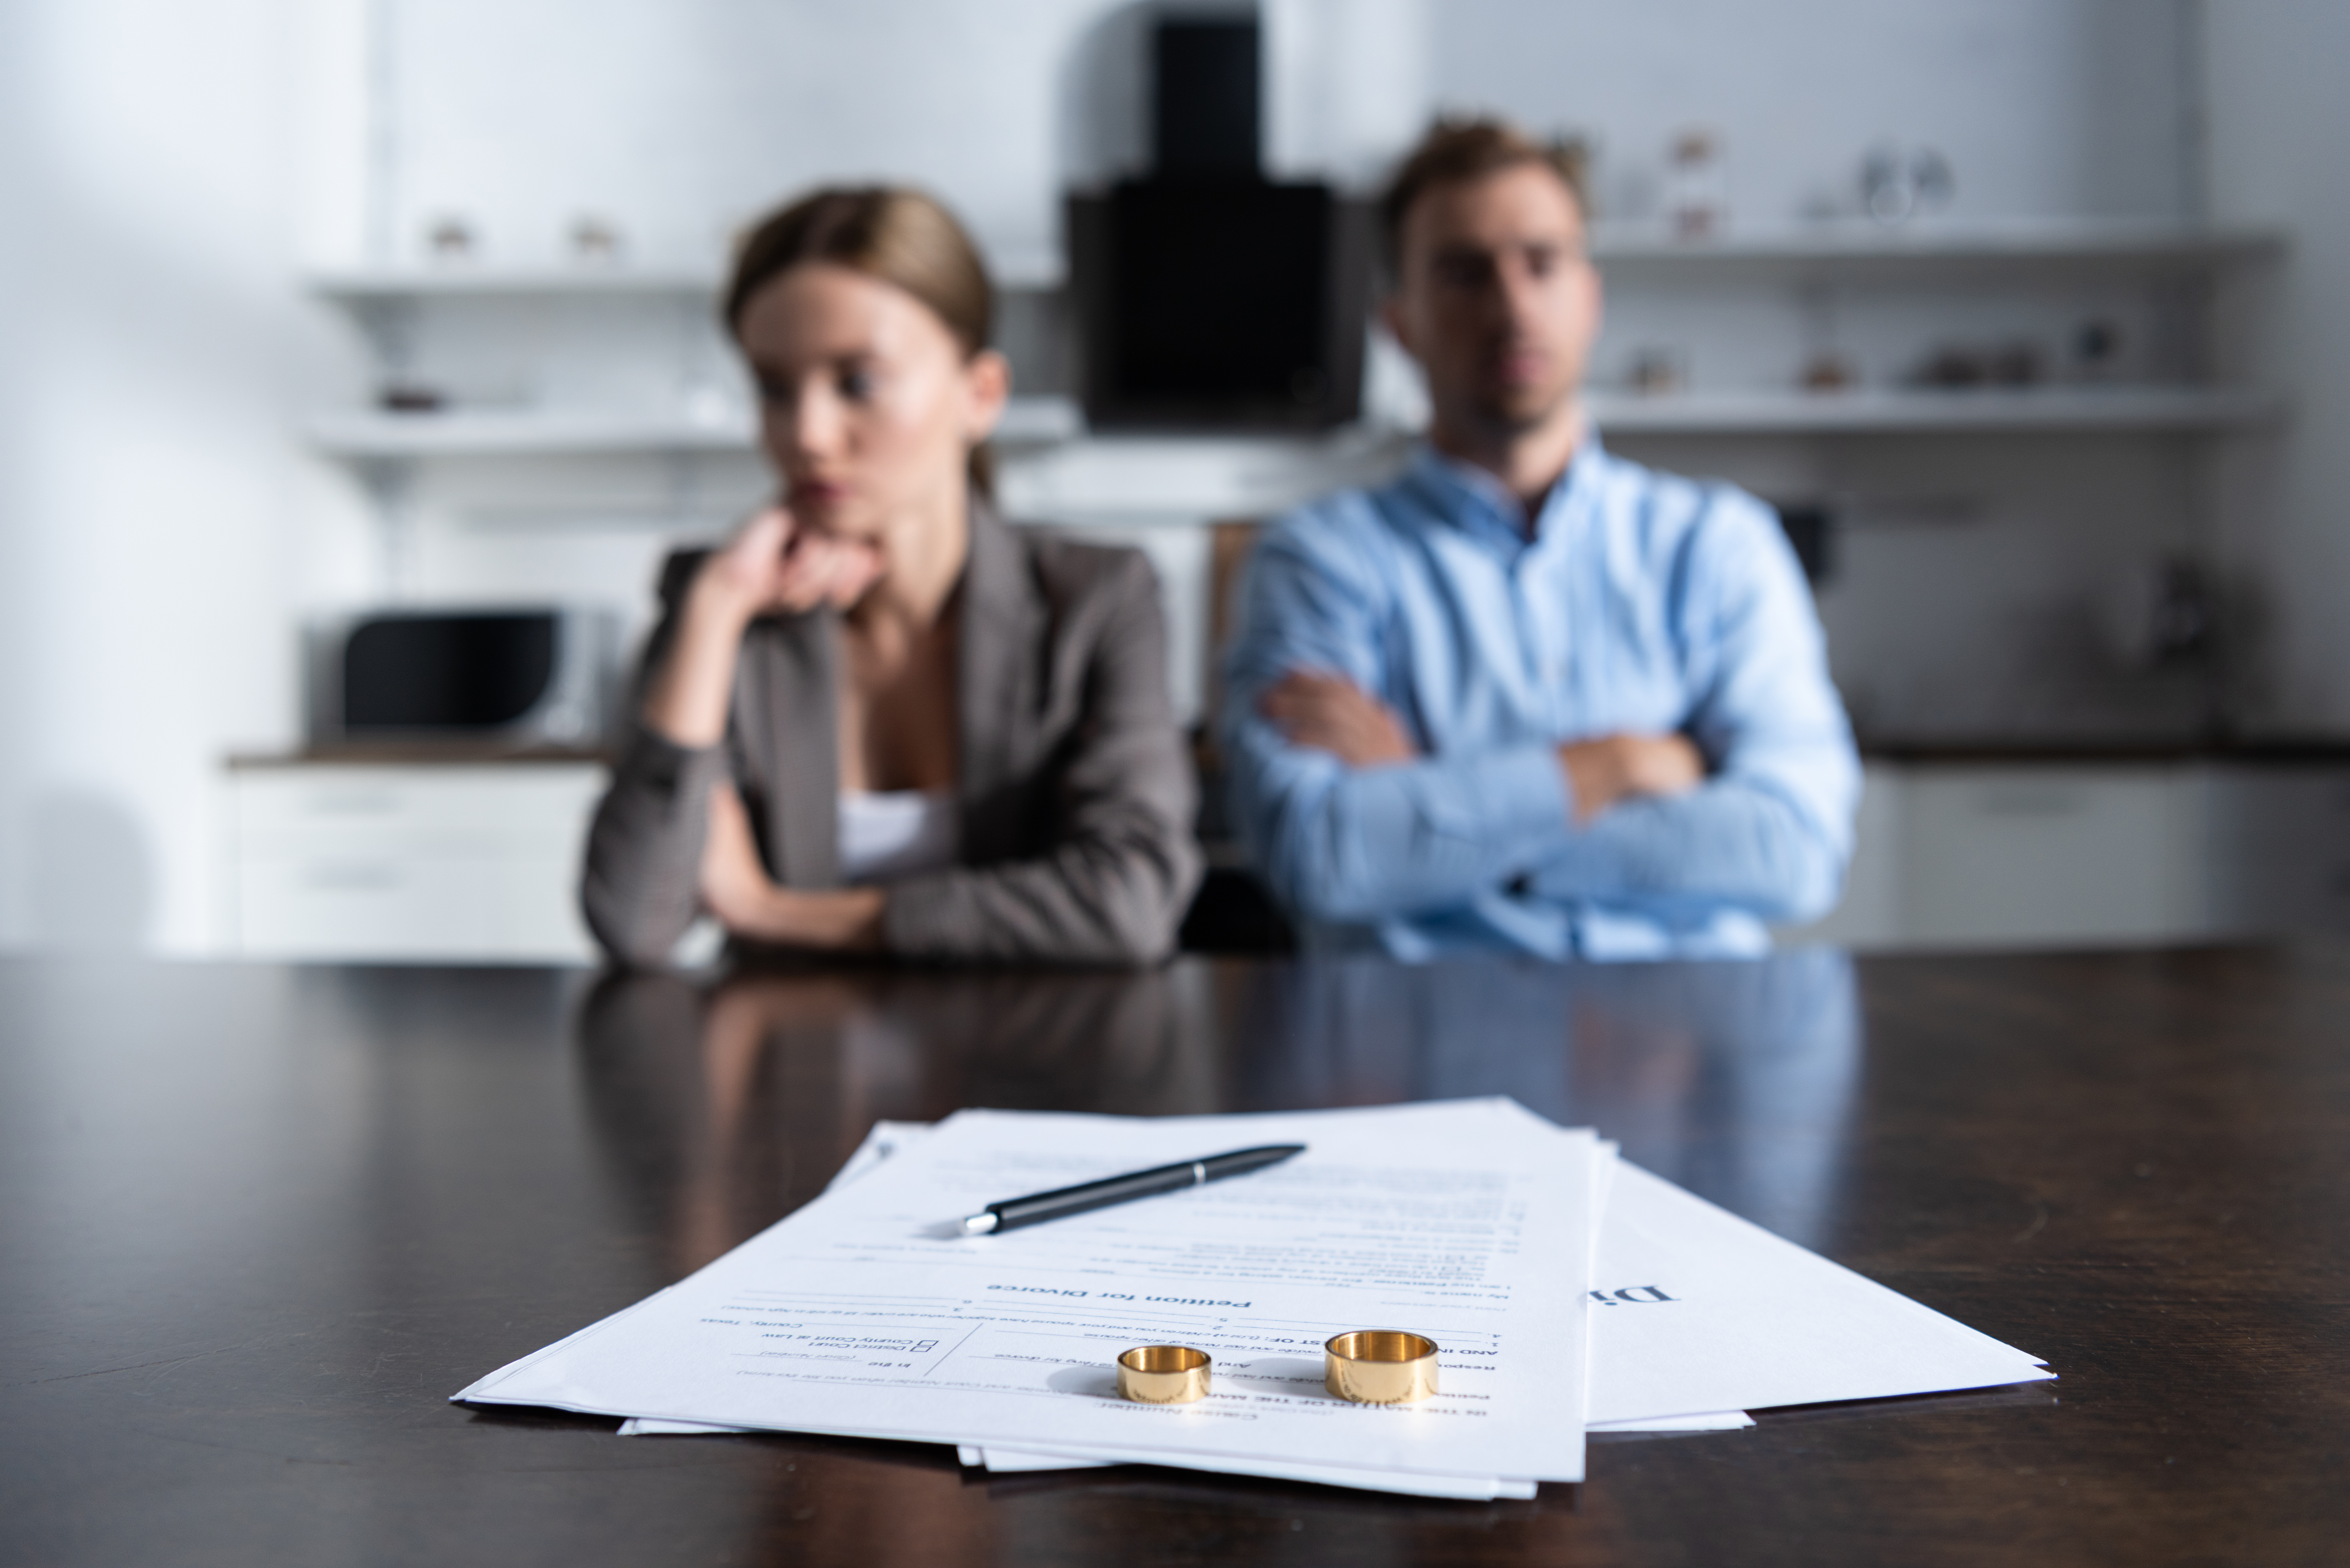 An upset couple sitting in the background with divorce papers and their rings on a table | Source: Shutterstock